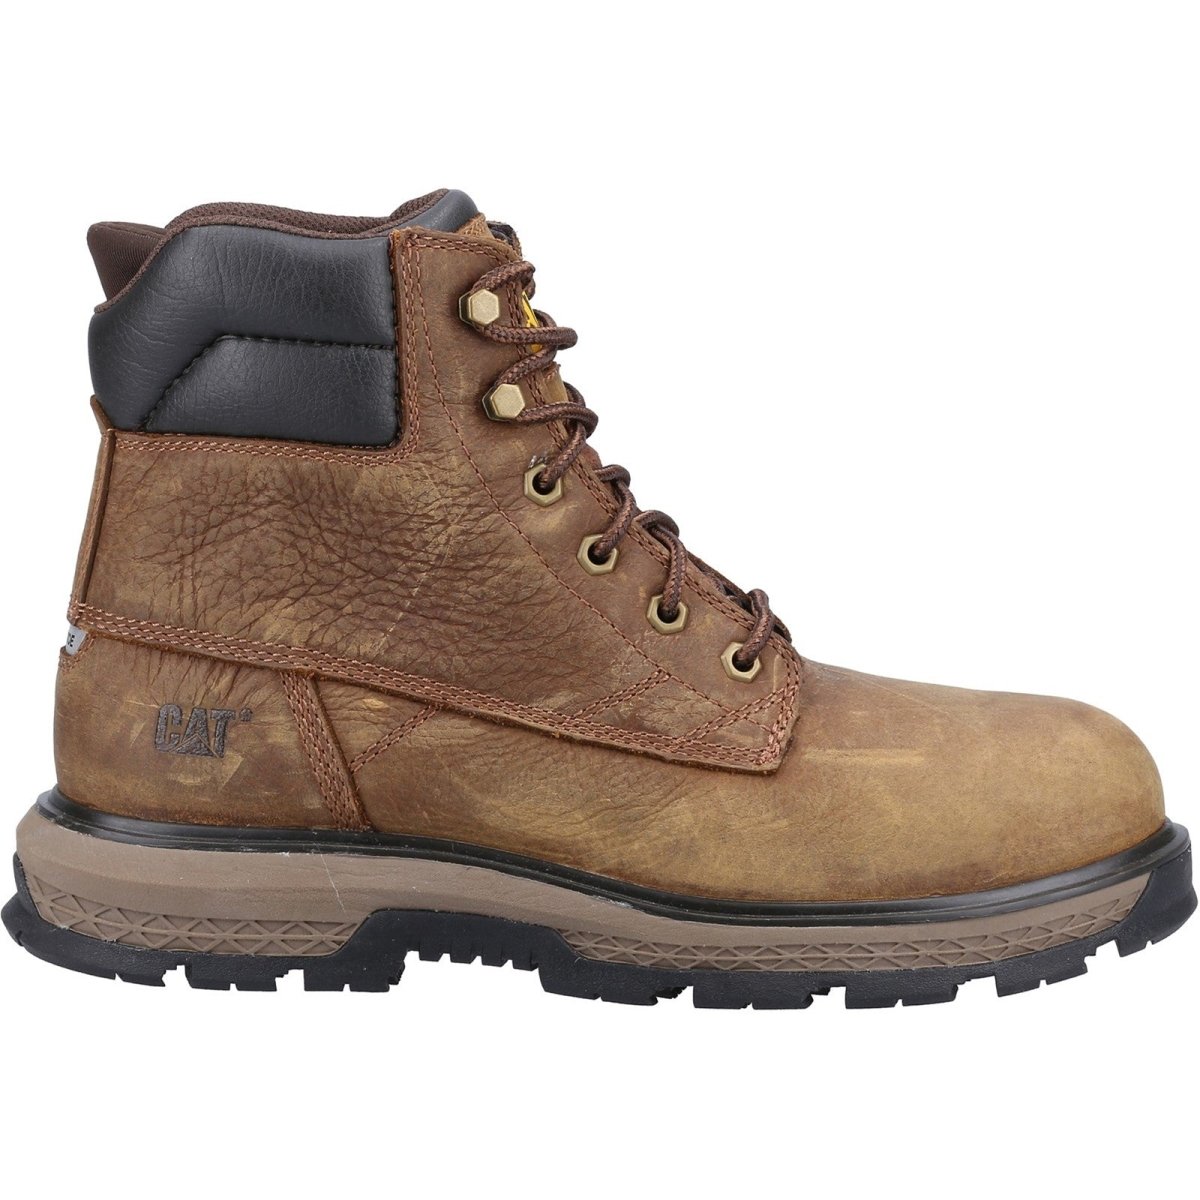 Caterpillar Exposition Steel Toe Safety Boots - Shoe Store Direct